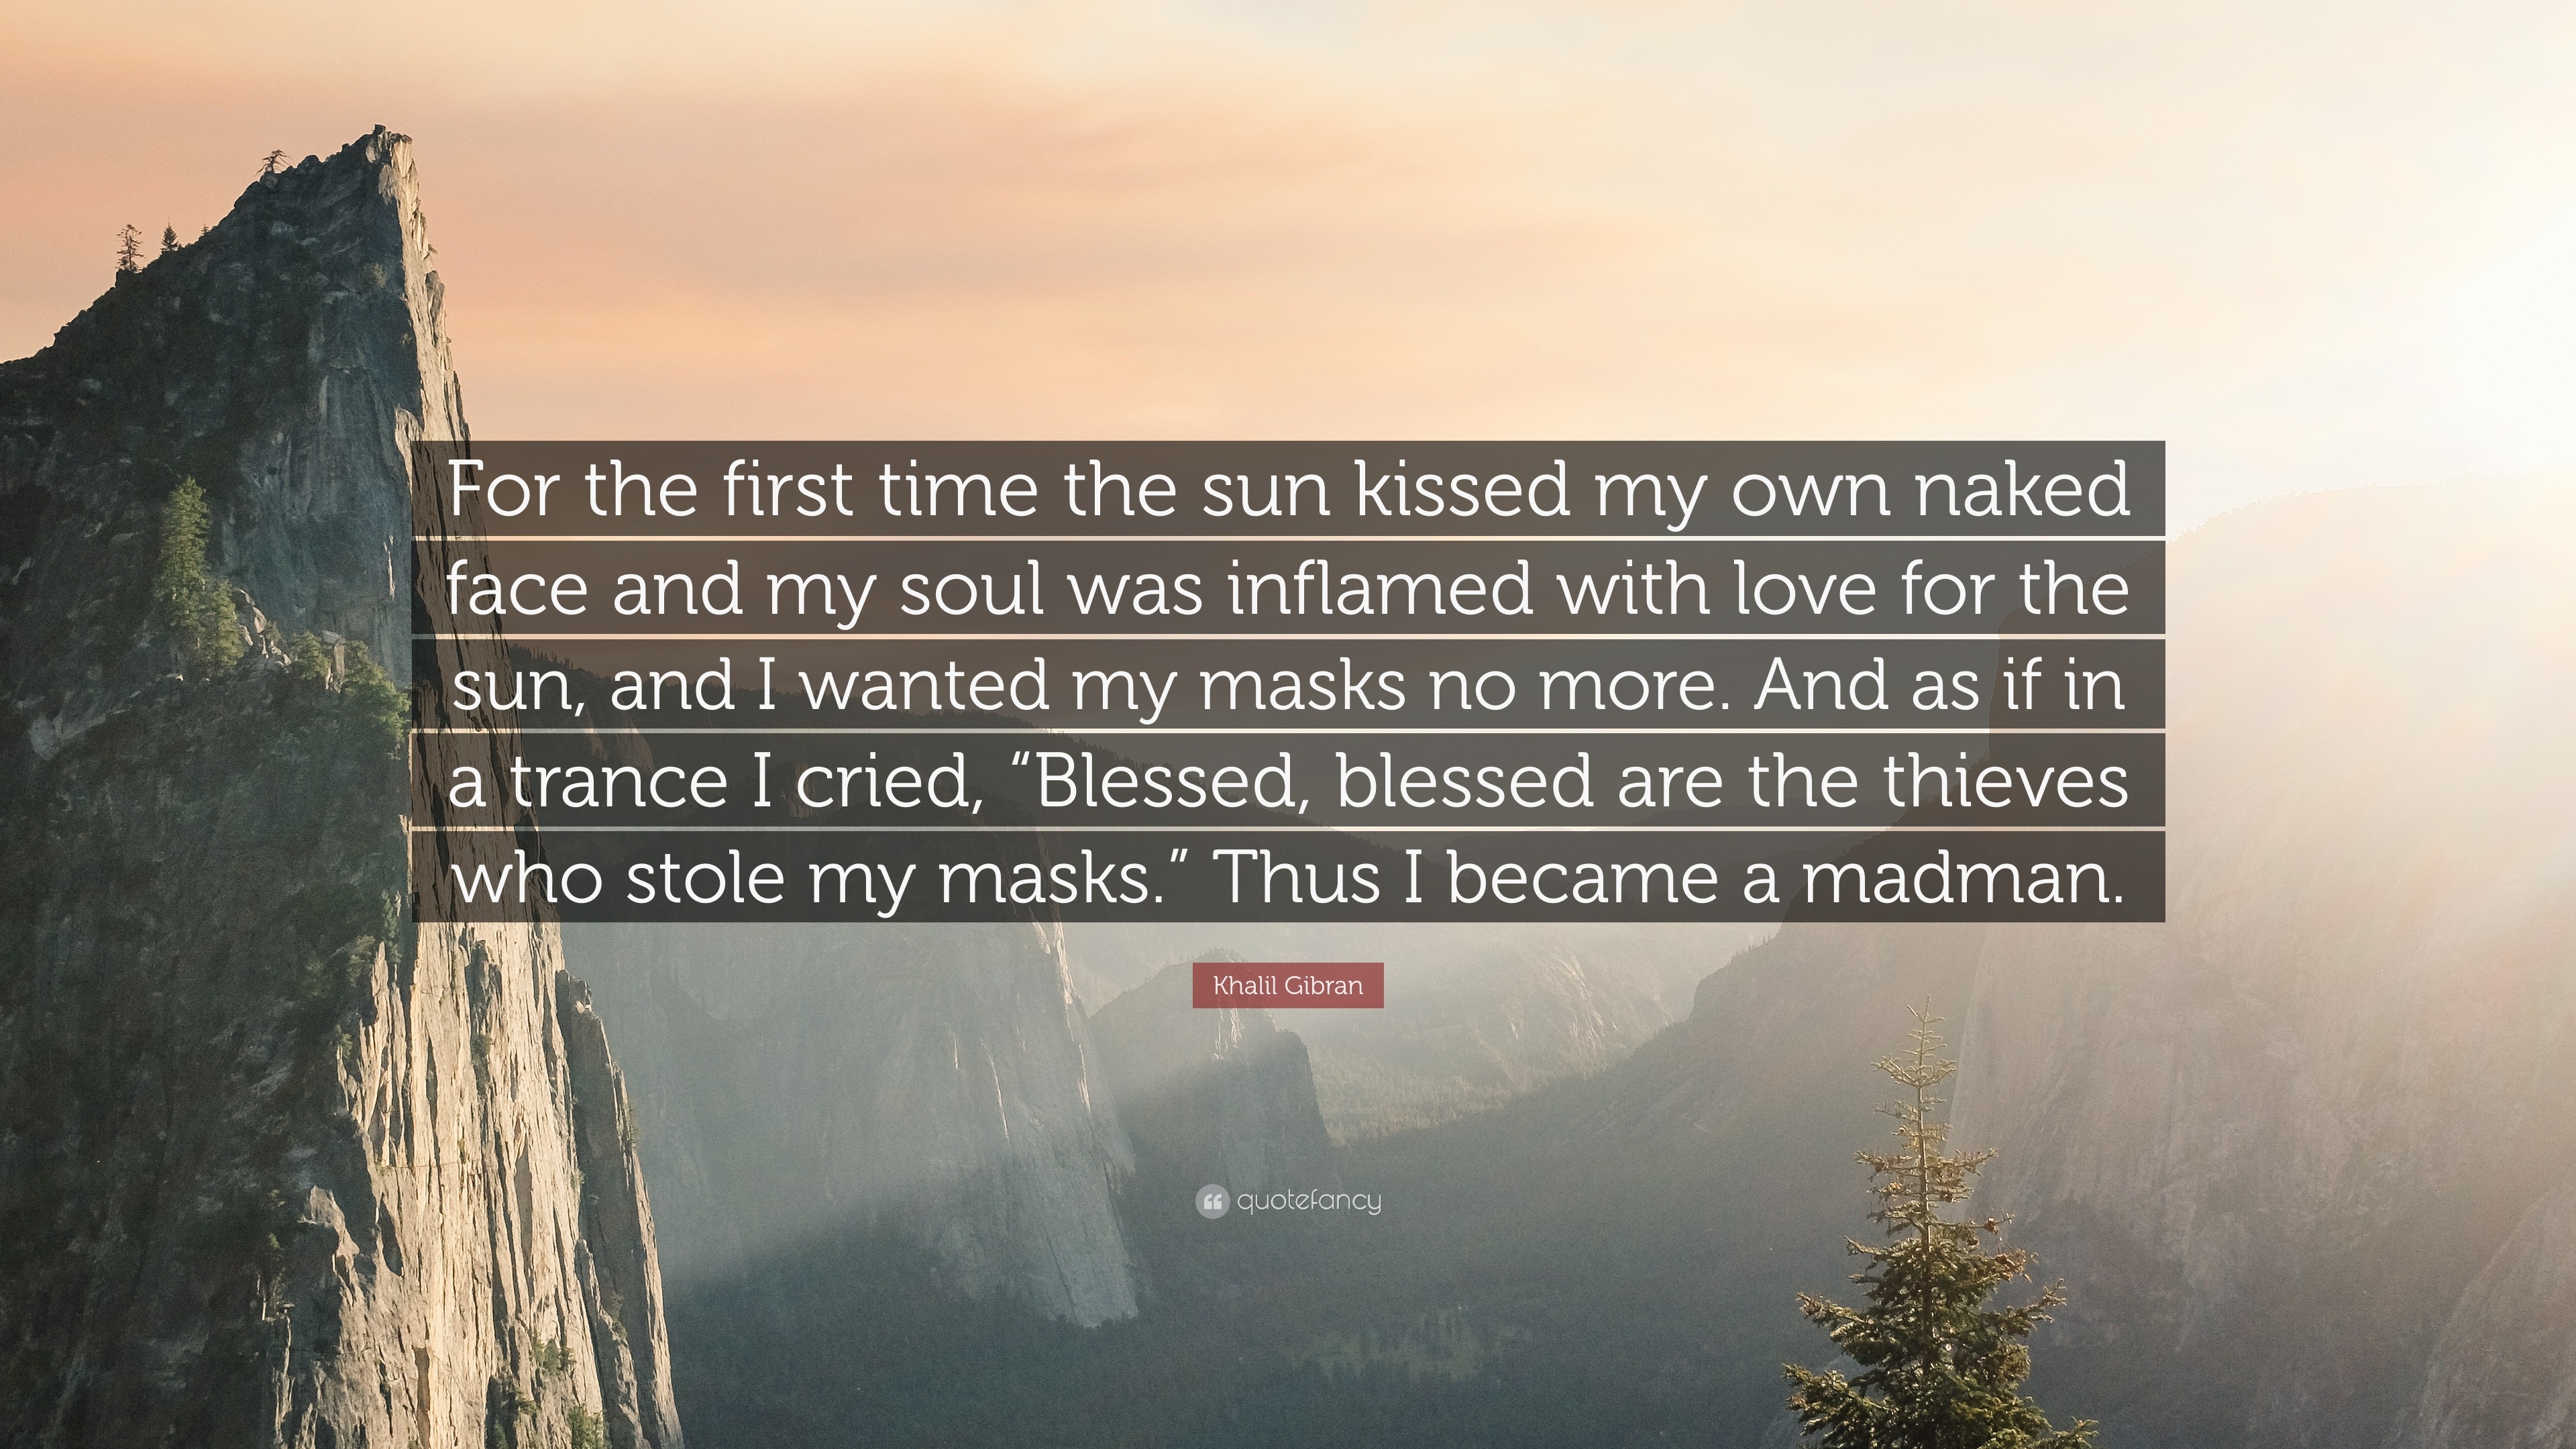 Khalil Gibran Quote “For the first time the sun kissed my own face